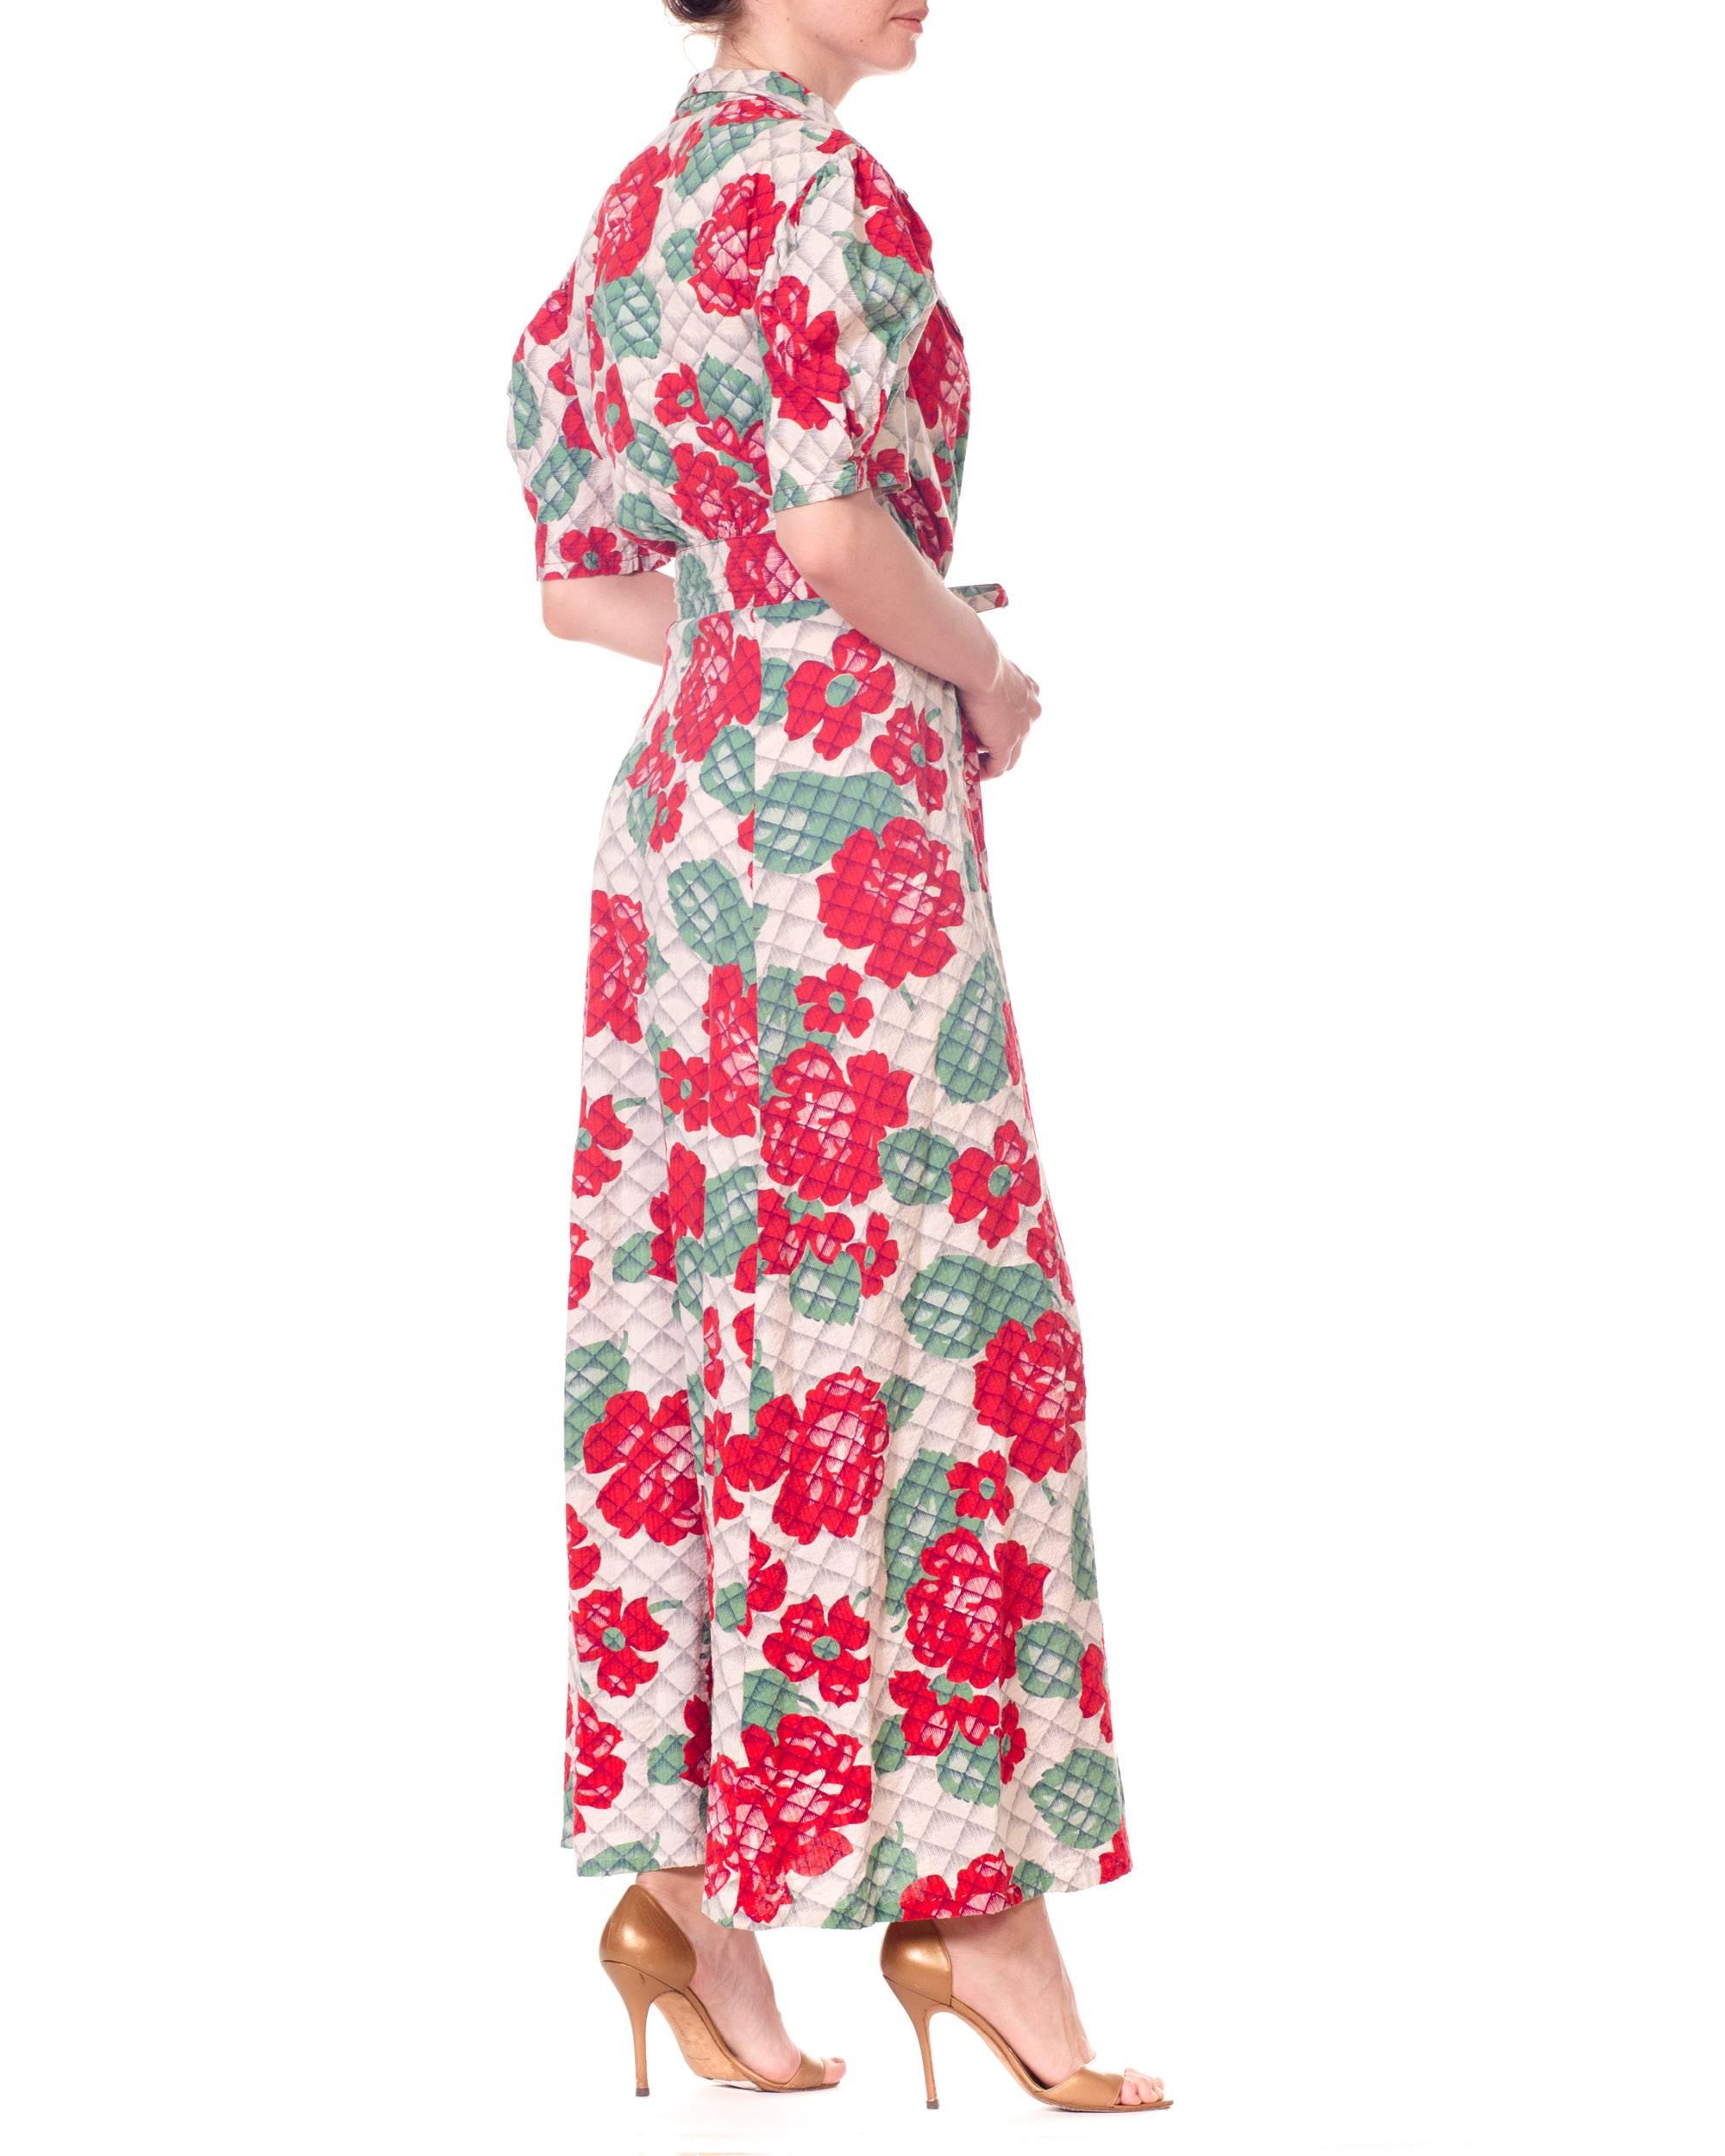 Women's 1930s 1940s Cotton Floral Quilted Wrap Dress